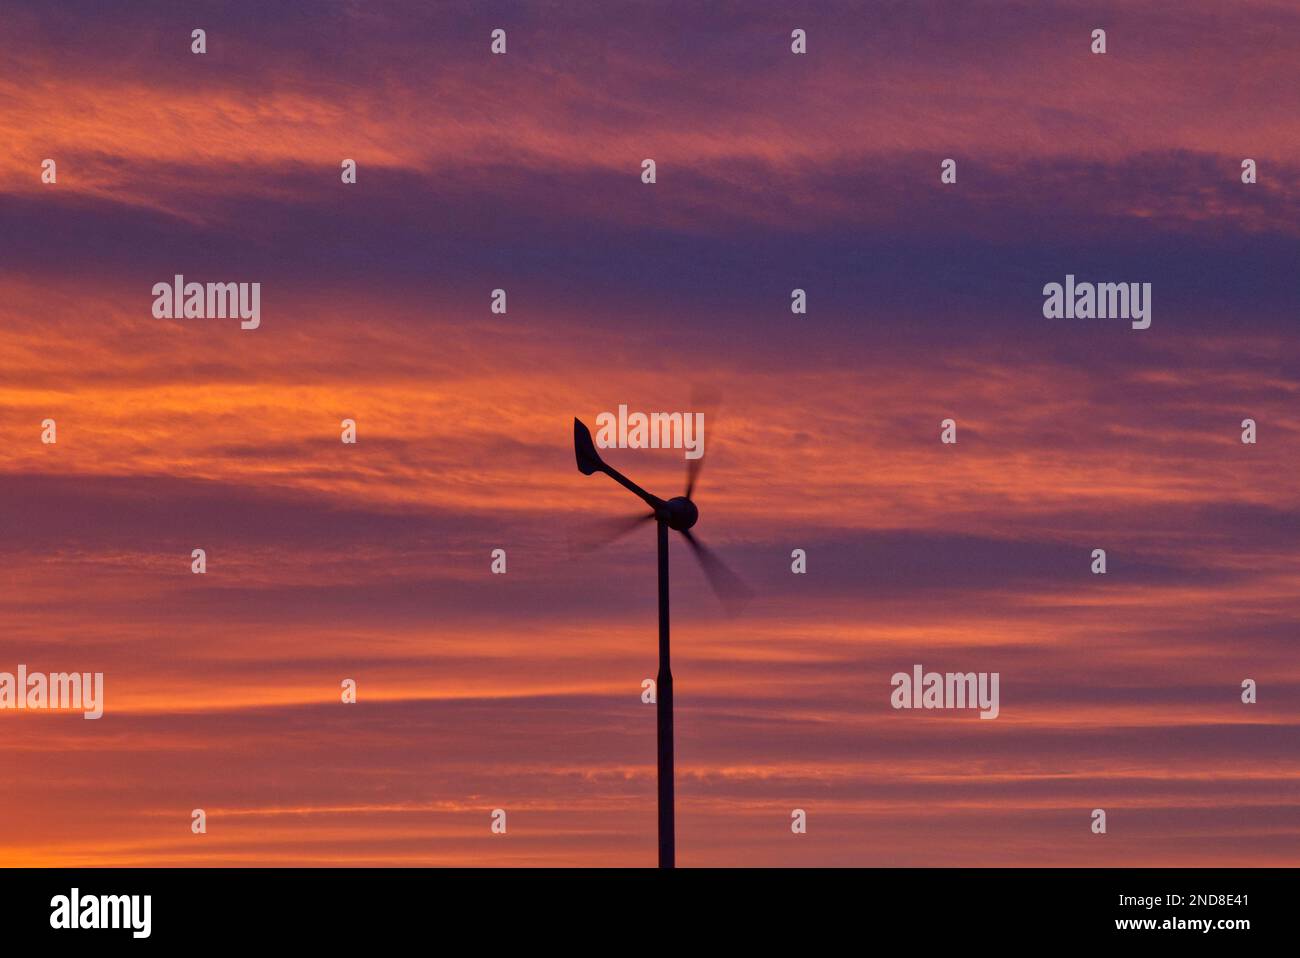 Wind turbine silhouetted against a red sky Stock Photo